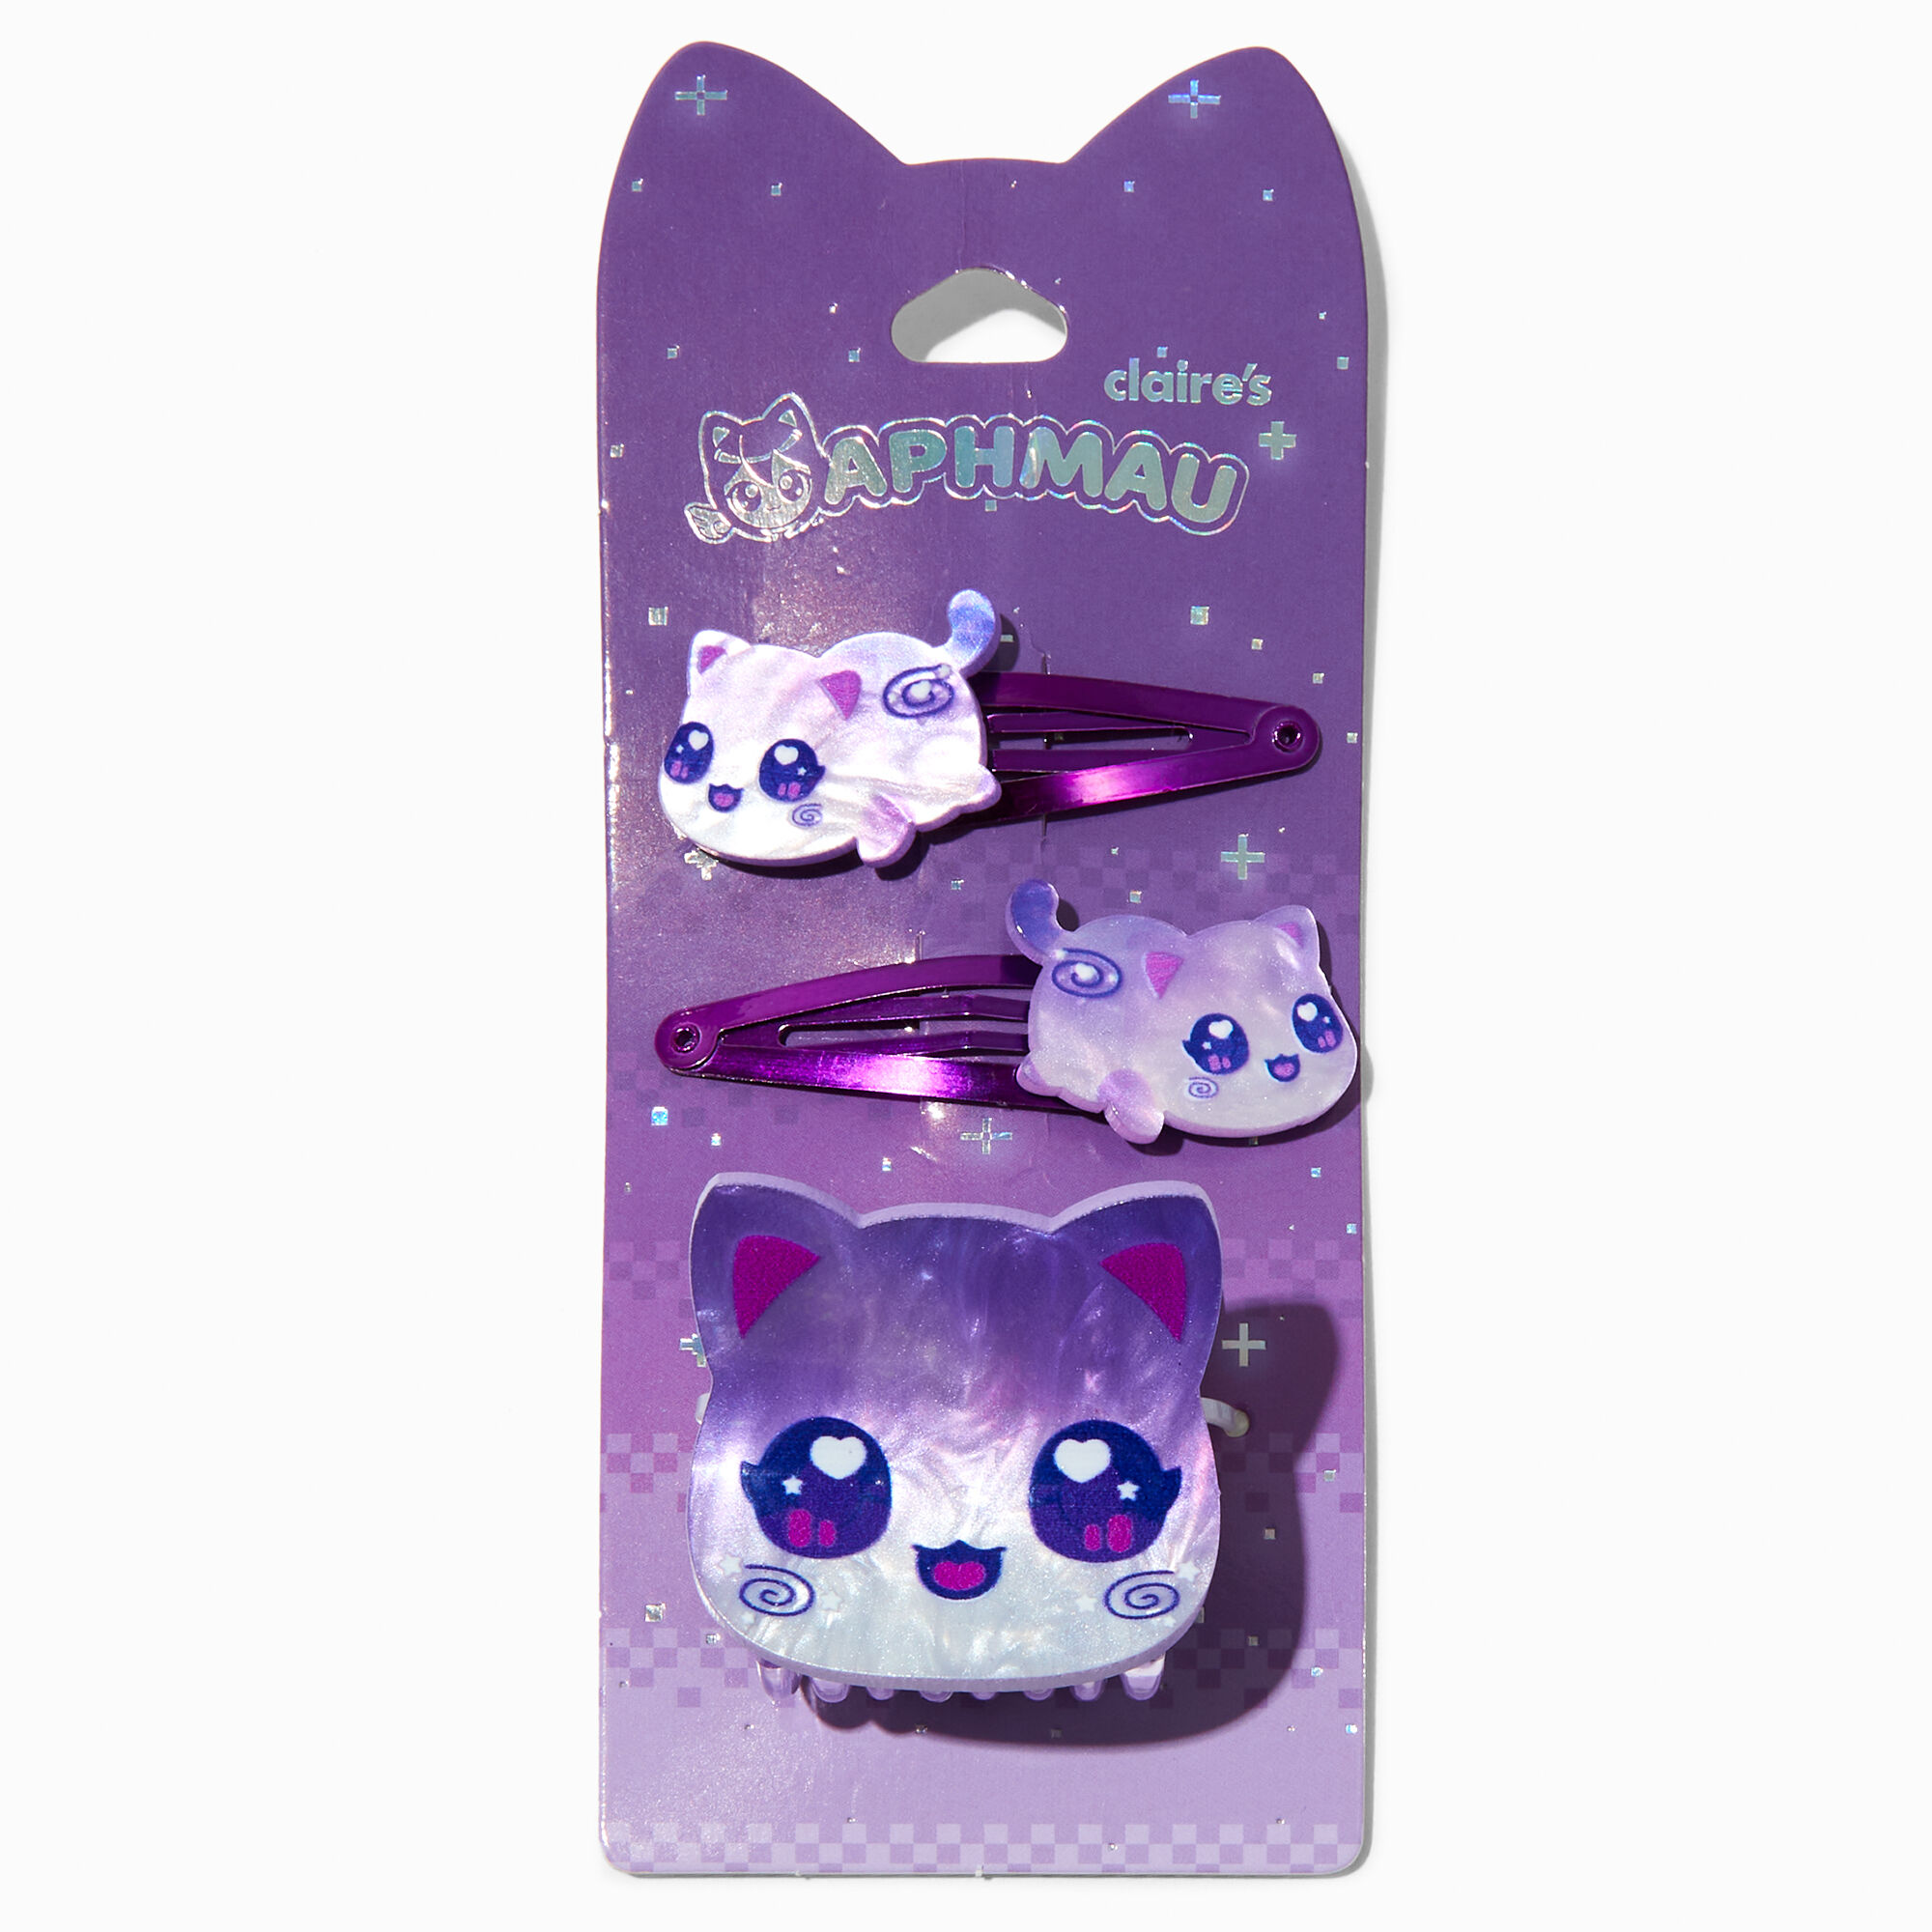 View Aphmau Claires Exclusive Galaxy Cat Hair Set 3 Pack information